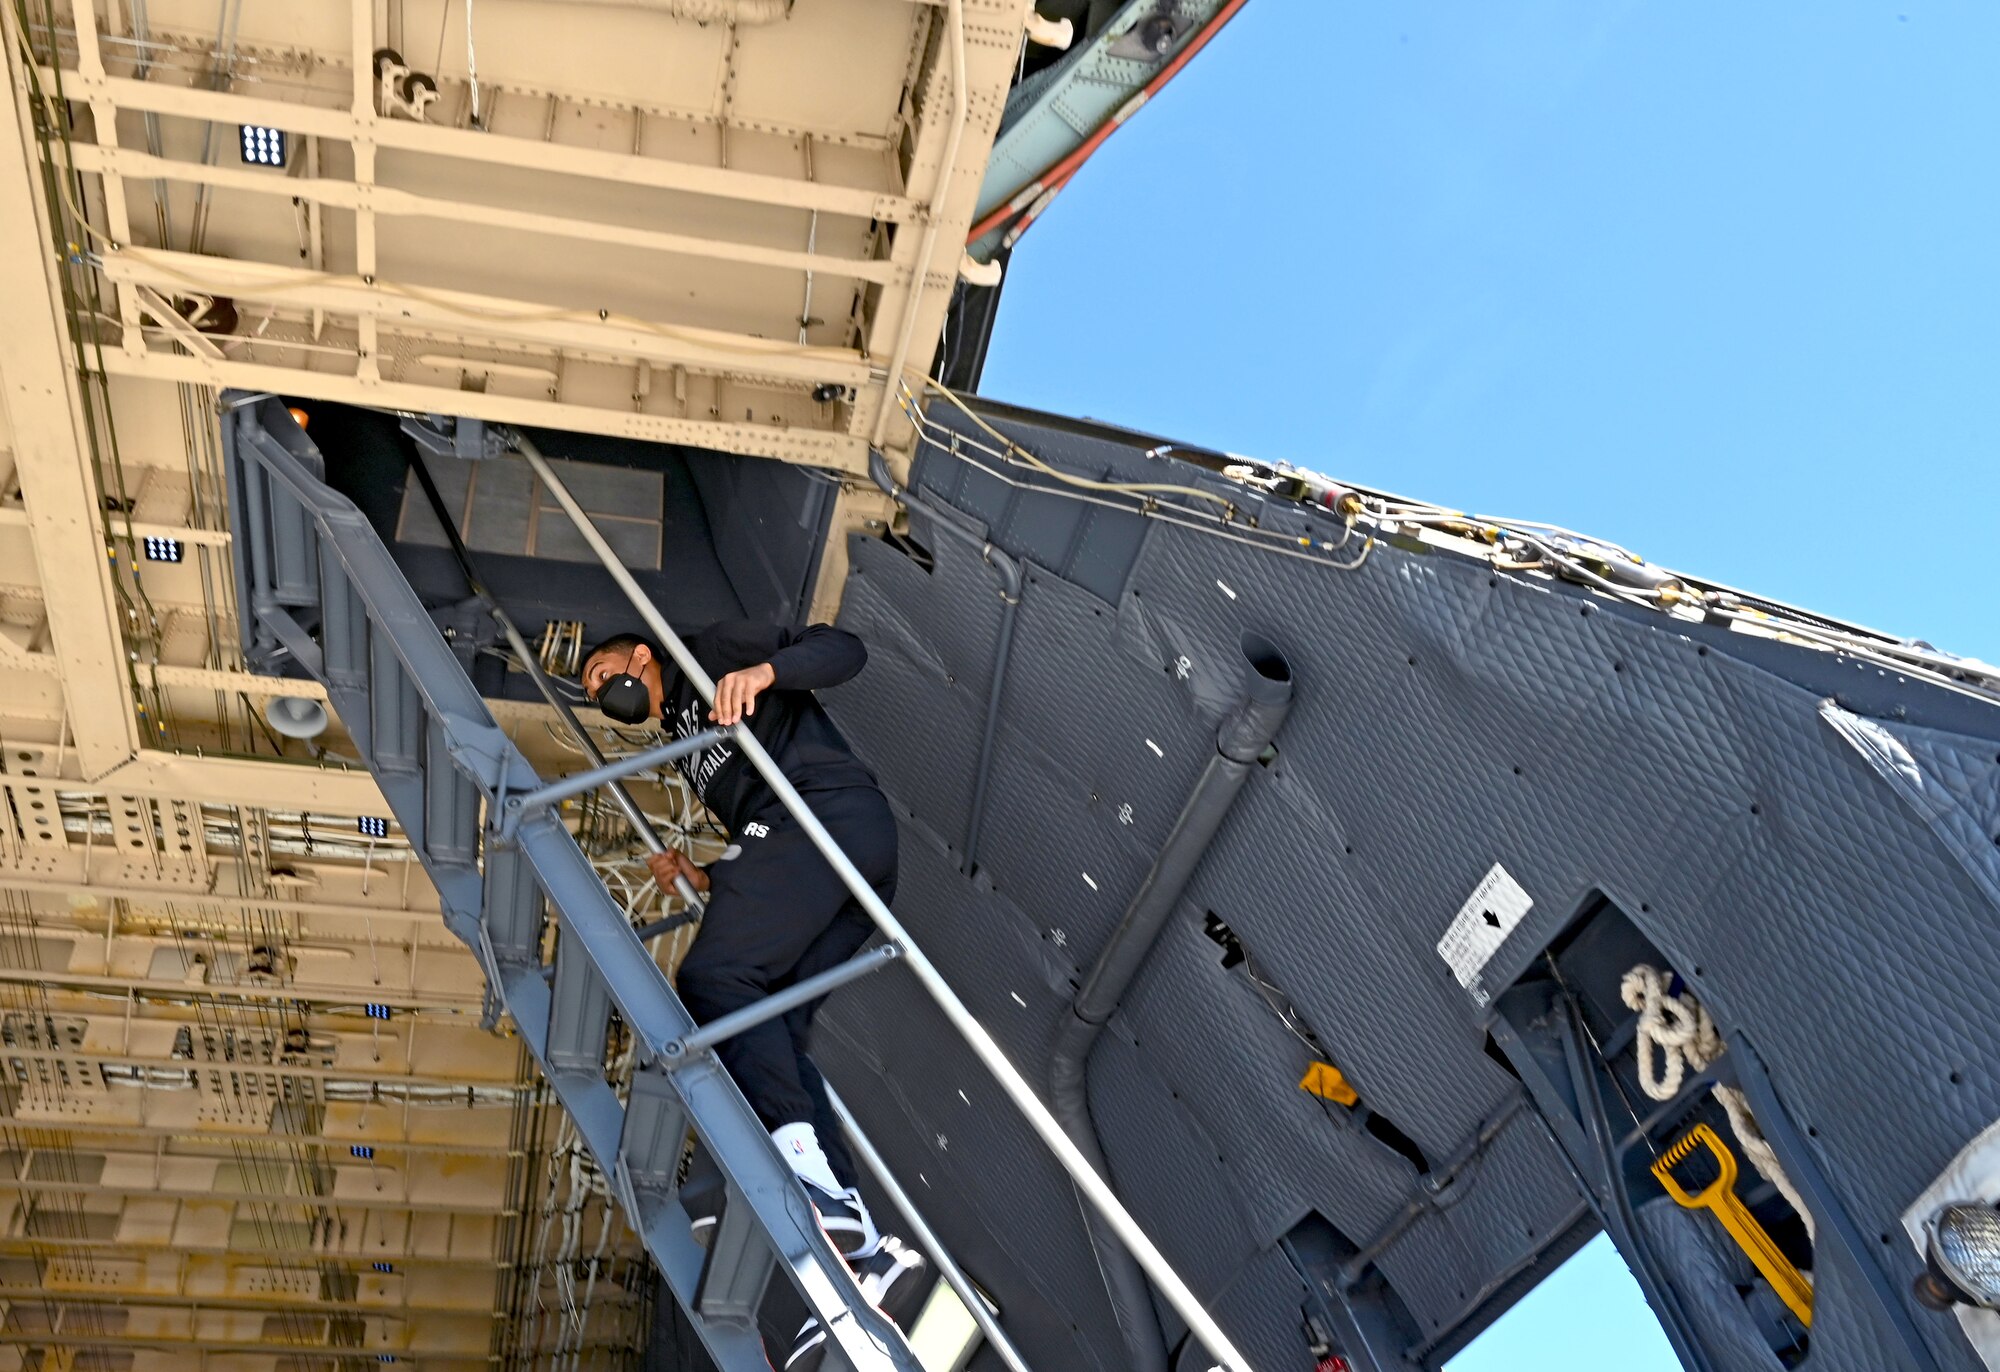 Keldon Johnson, a San Antonio Spurs basketball player, climbs the stairs to the flight deck of a C-5M Super Galaxy aircraft during his visit to the 433rd Airlift Wing at Joint Base San Antonio-Lackland, Texas, March 2, 2022. Johnson toured the aircraft, then greeted Reserve Citizen Airmen in the wing for autographs and photos. (U.S. Air Force photo by Samantha Mathison)